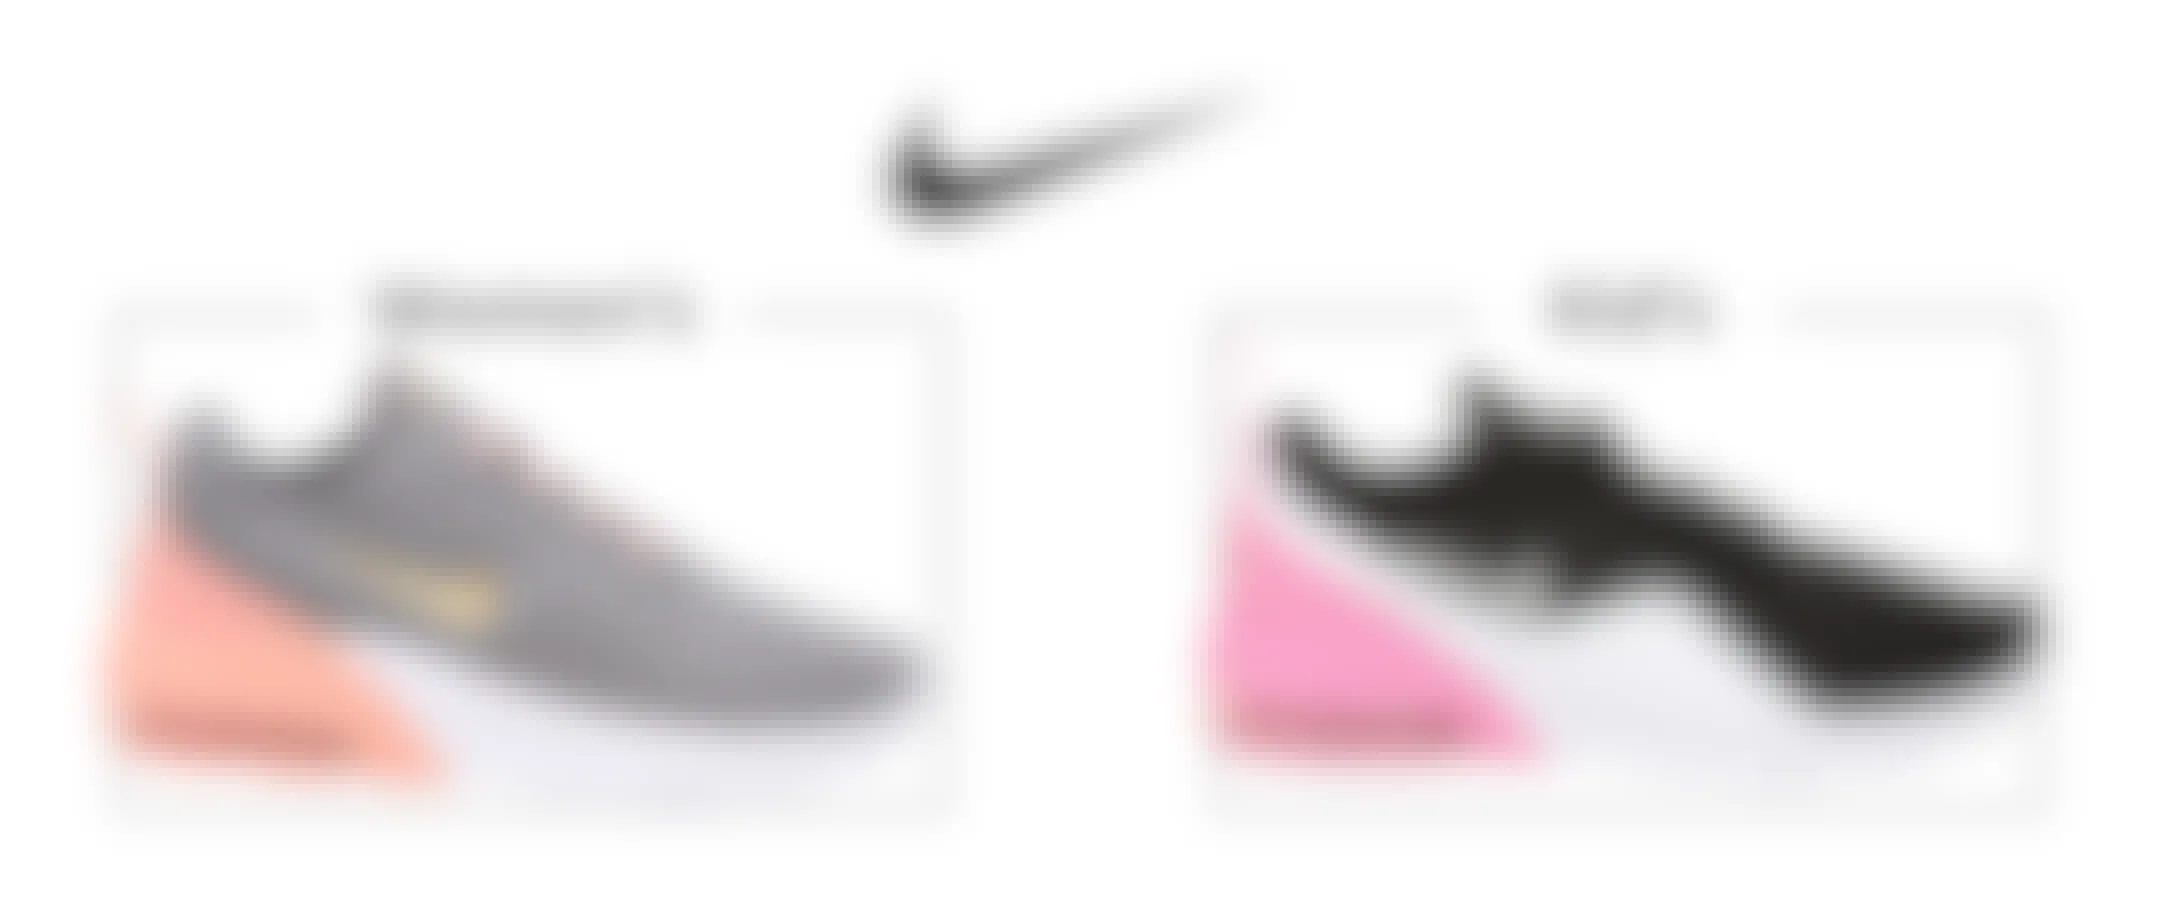 A comparison of a kid's and women's Nike shoe